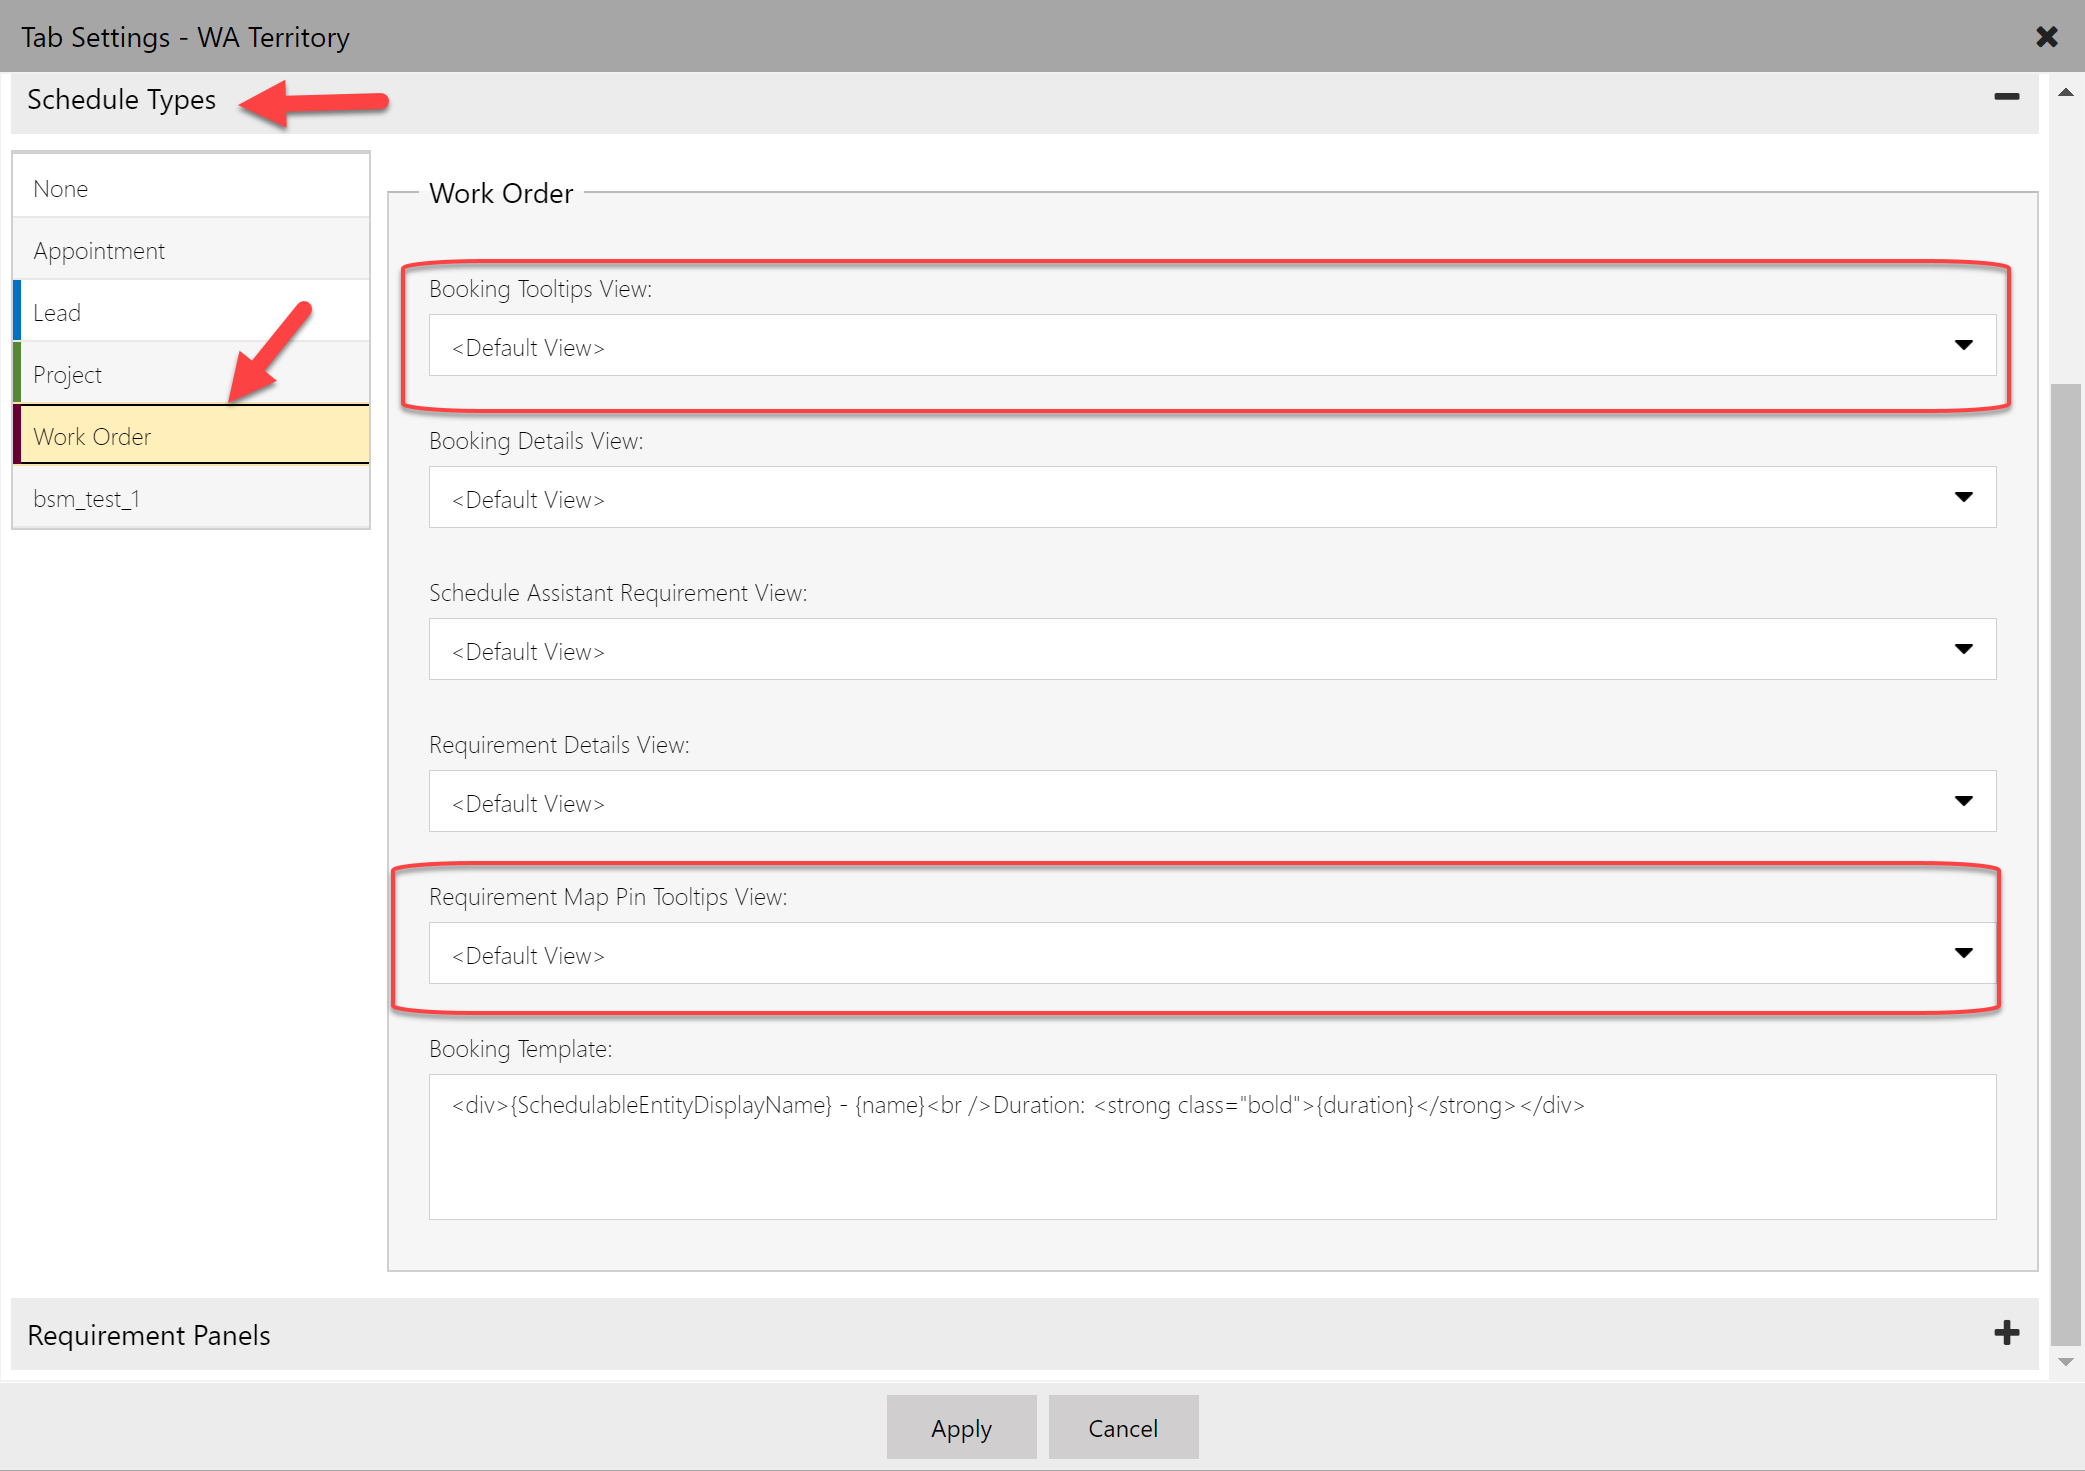 Schedule board settings in the schedule types section allowing you to change the view driving the tooltips for bookings and requirements.